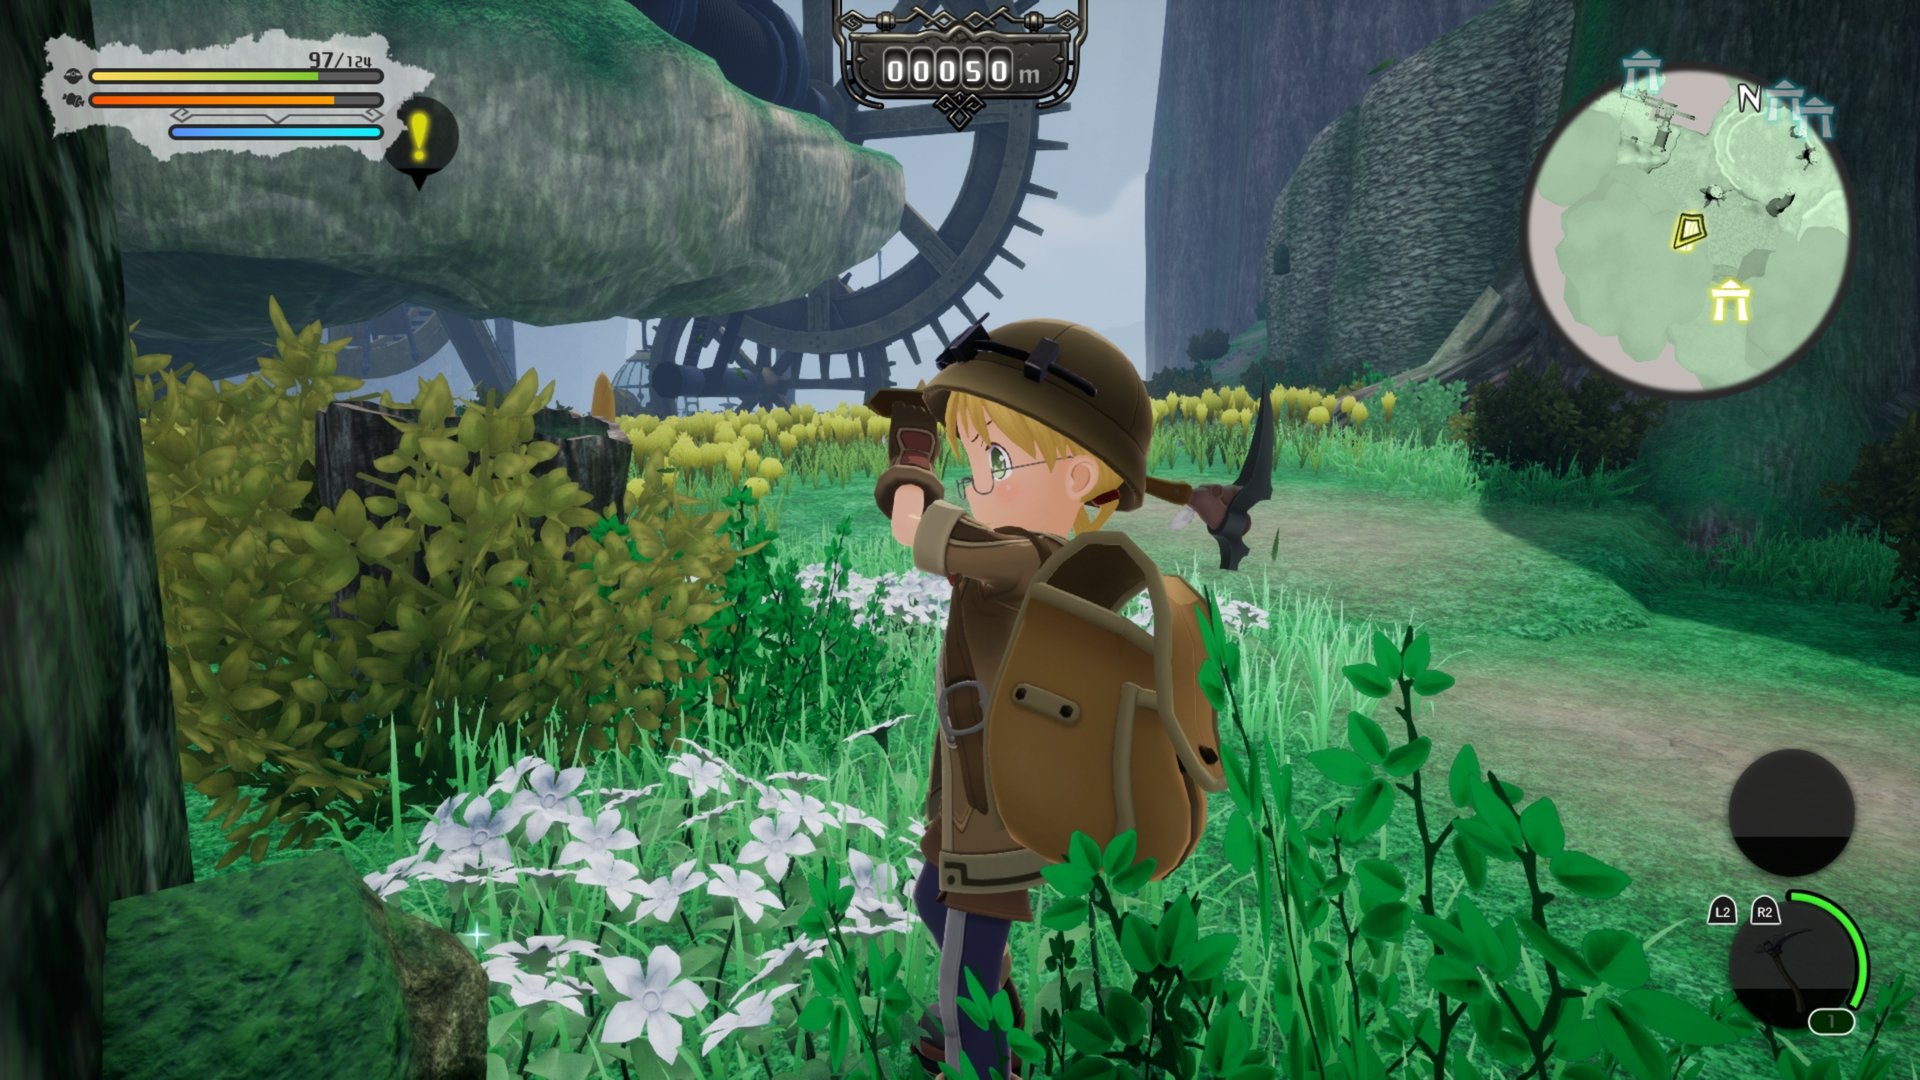 Made In Abyss Deserves A Good Video Game, And This One Isn't It